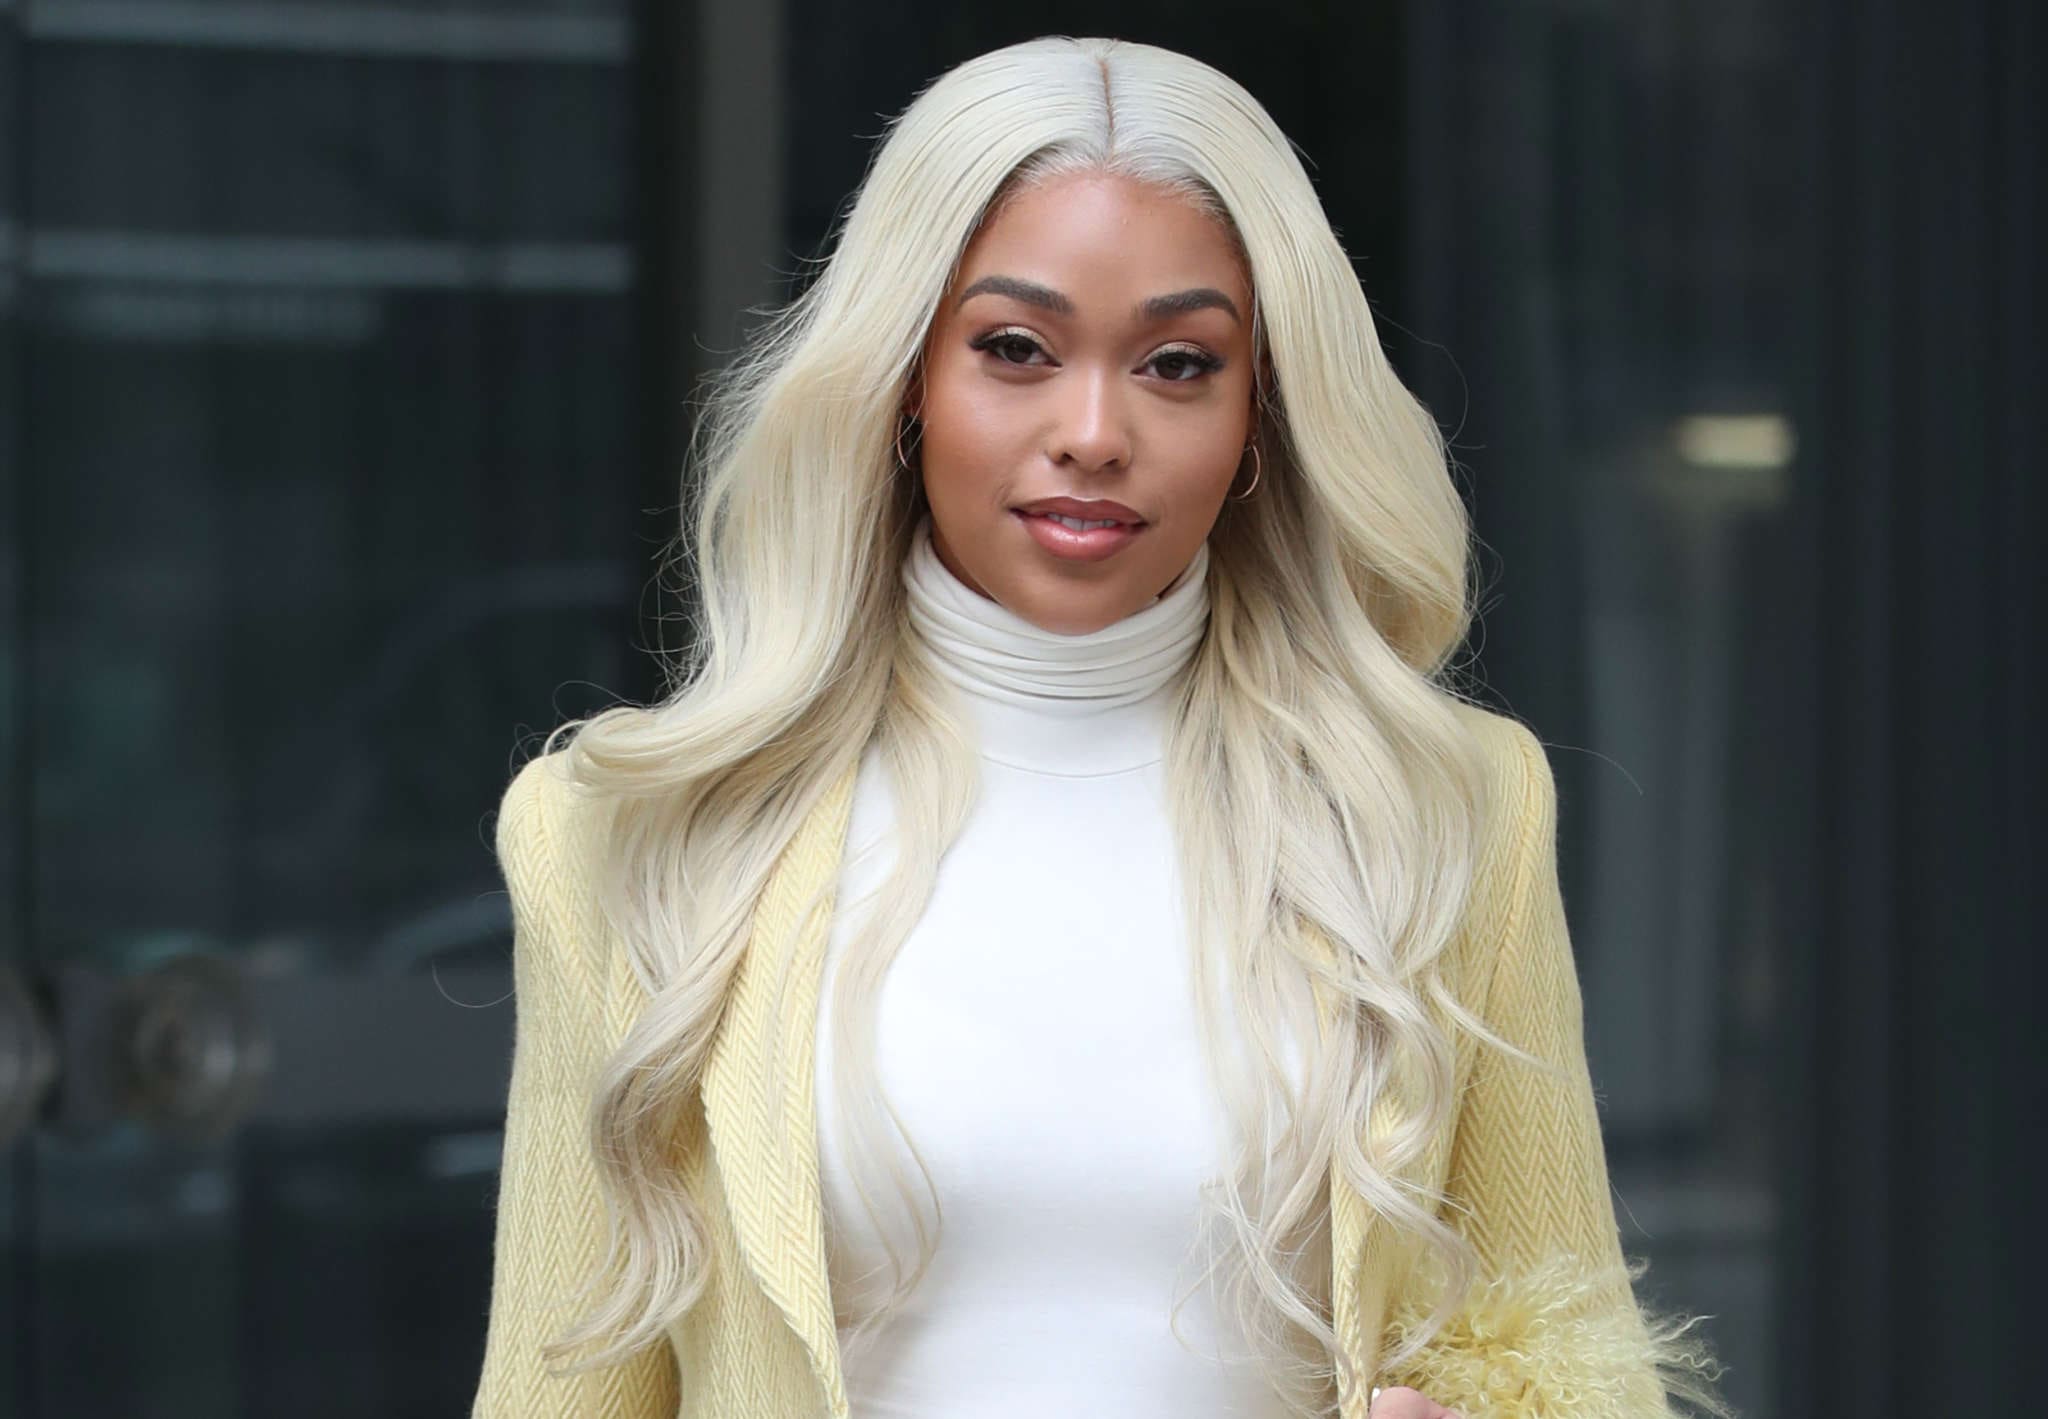 Jordyn Woods Shows Fans Her Favorite Campaign To Shoot This Year - See The Video